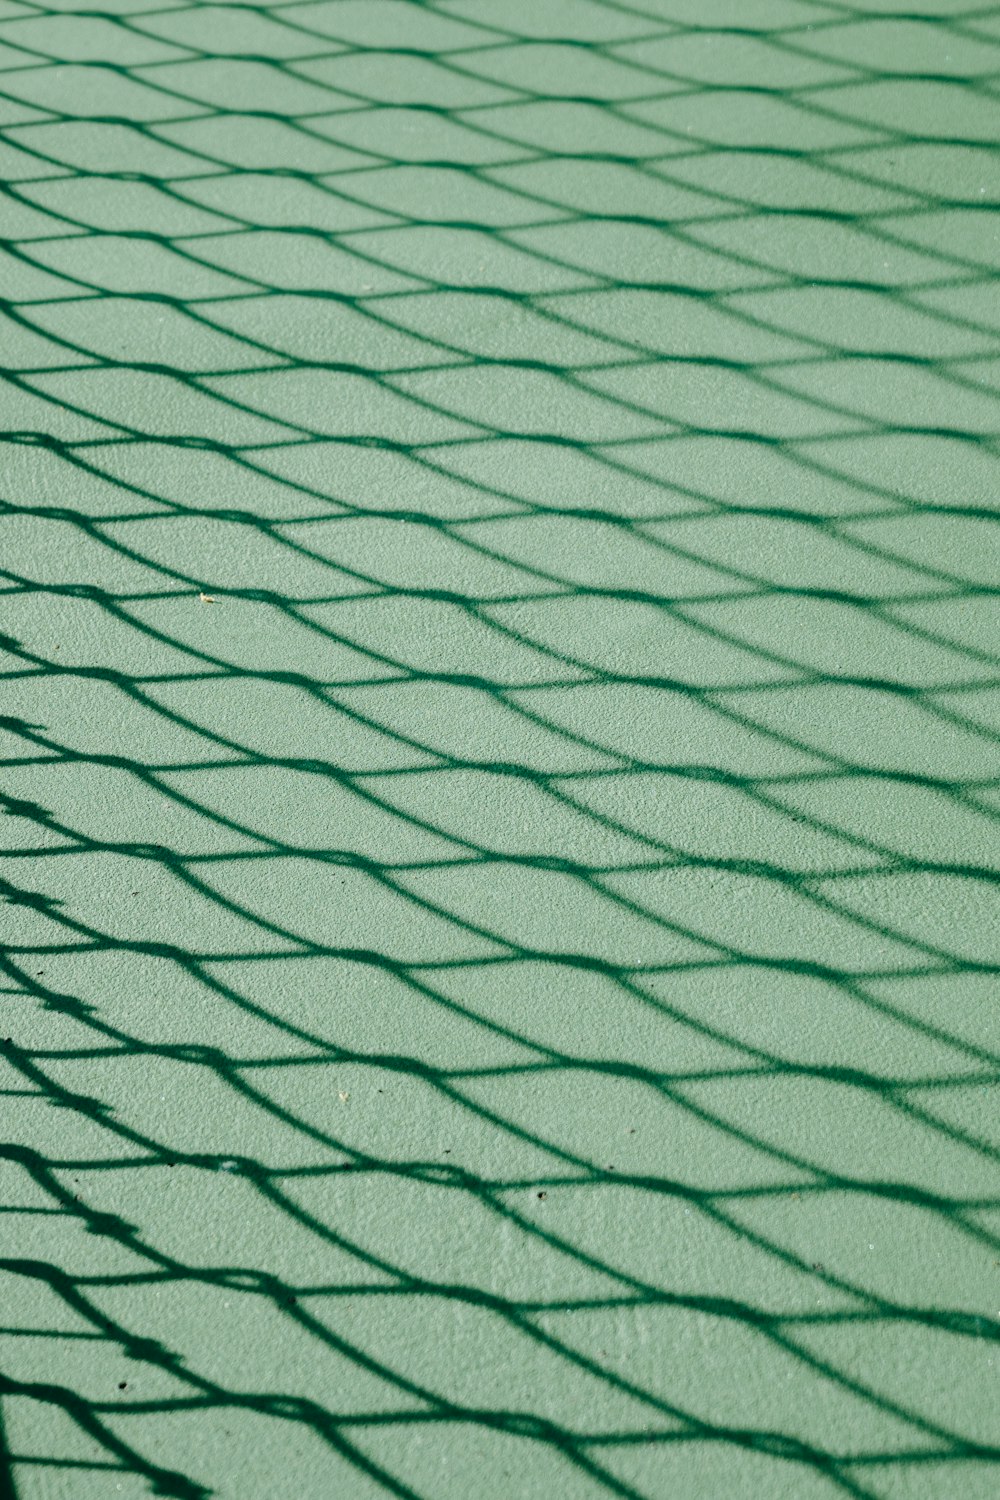 a tennis racket is laying on a tennis court